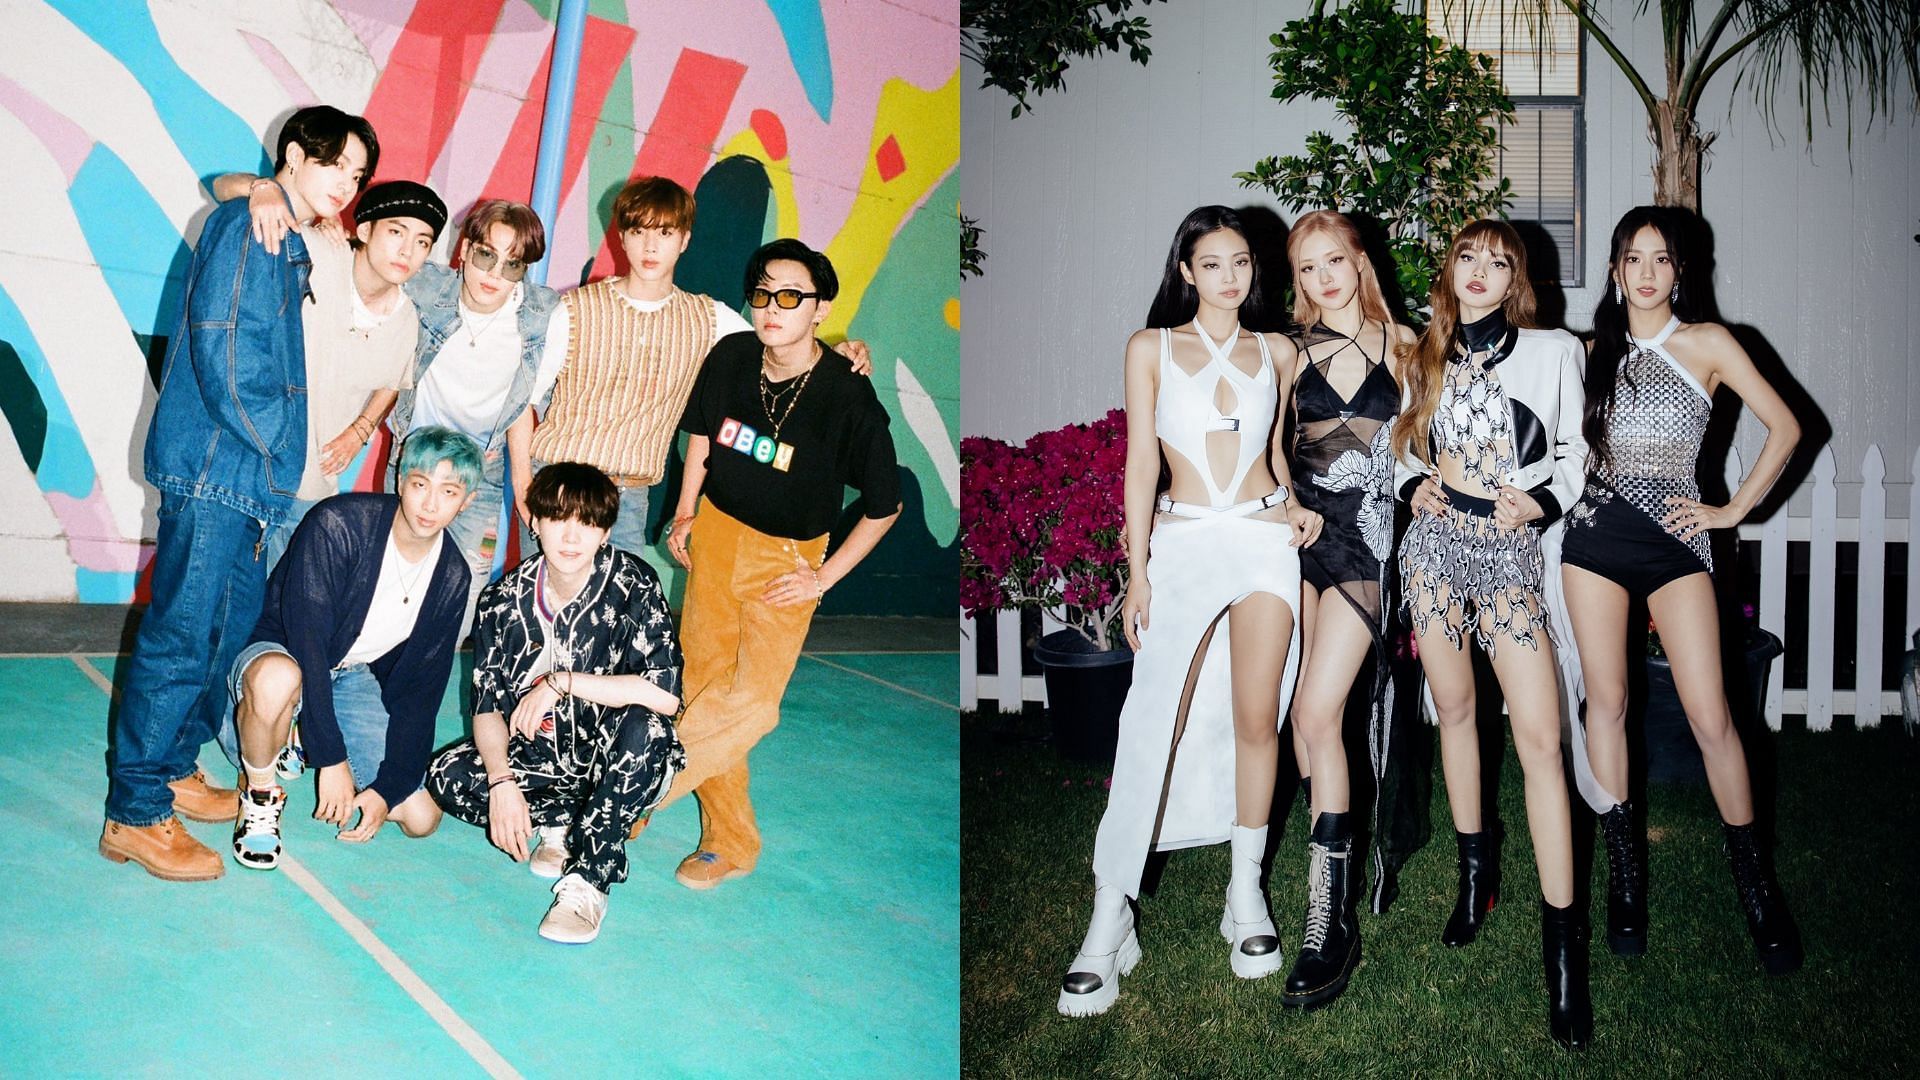 BTS and BLACKPINK are among the biggest K-pop groups on Earth.